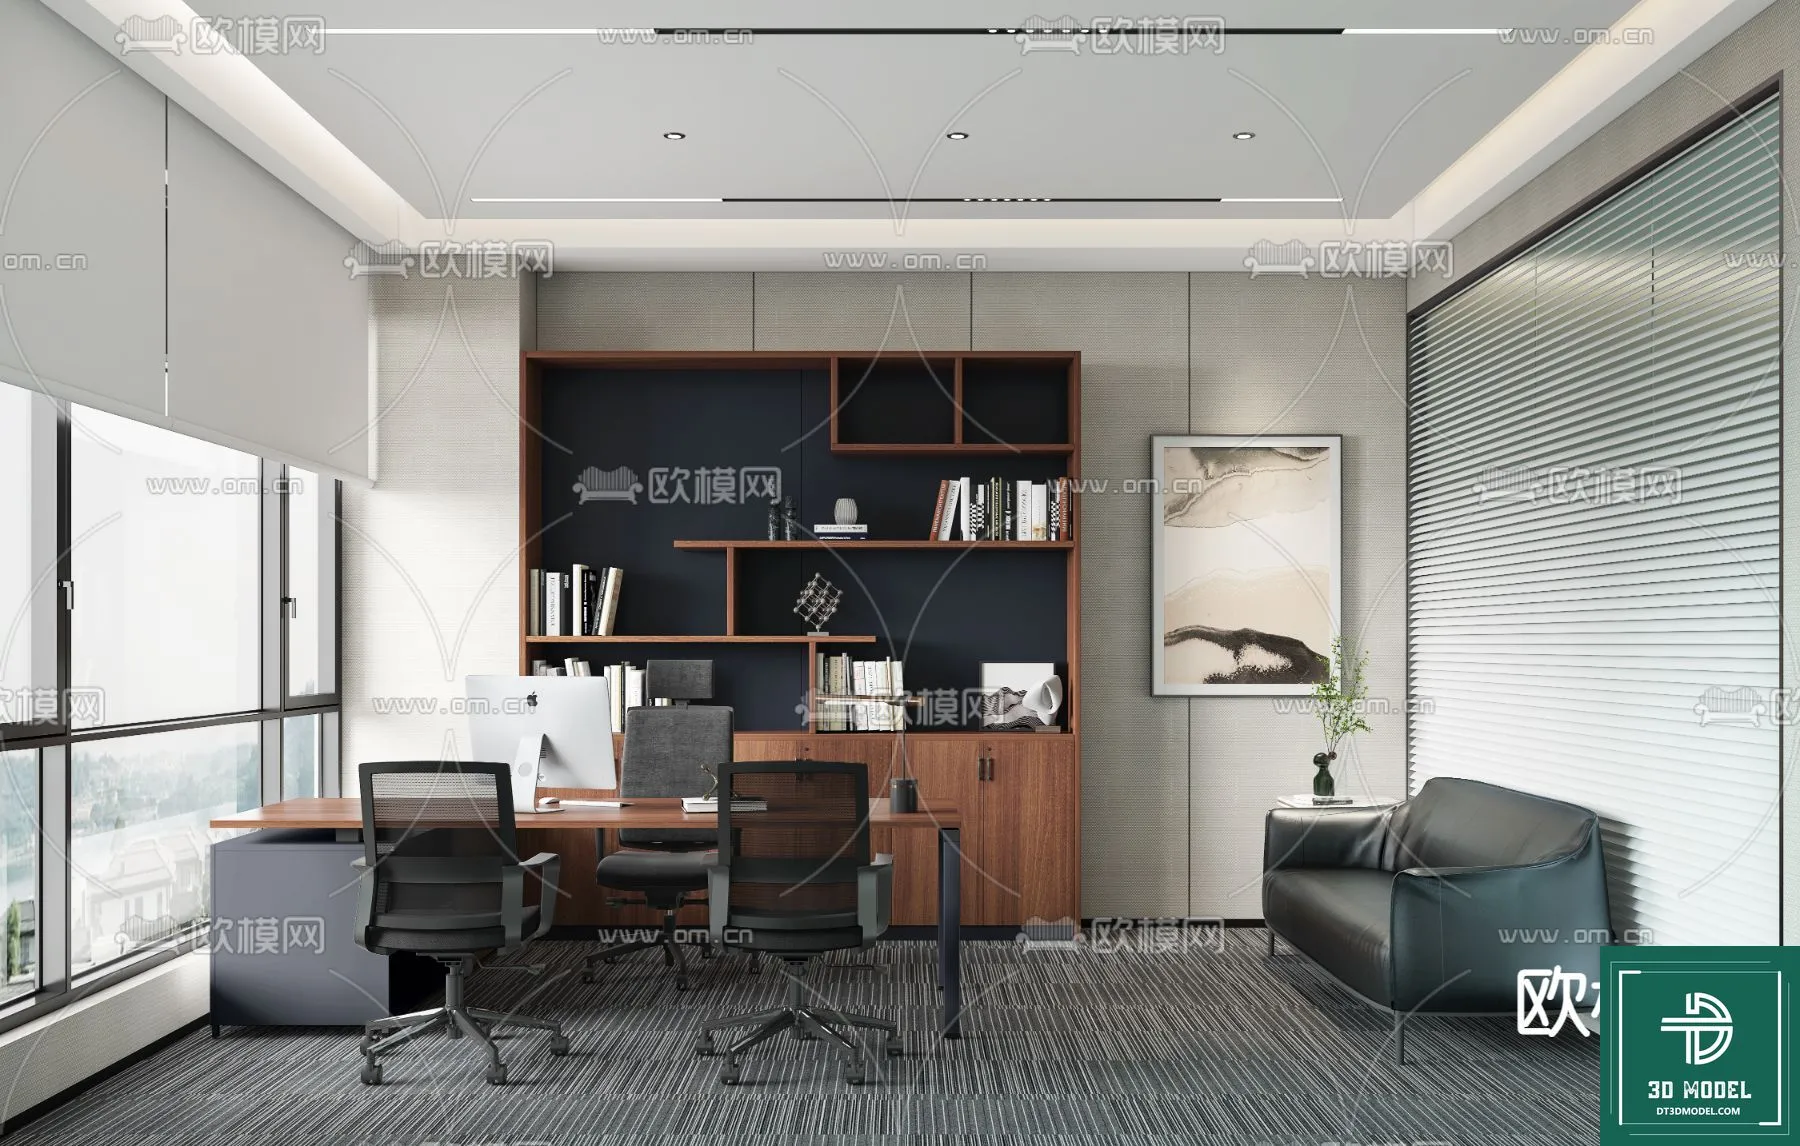 OFFICE ROOM FOR MANAGER – 3DMODEL – 093